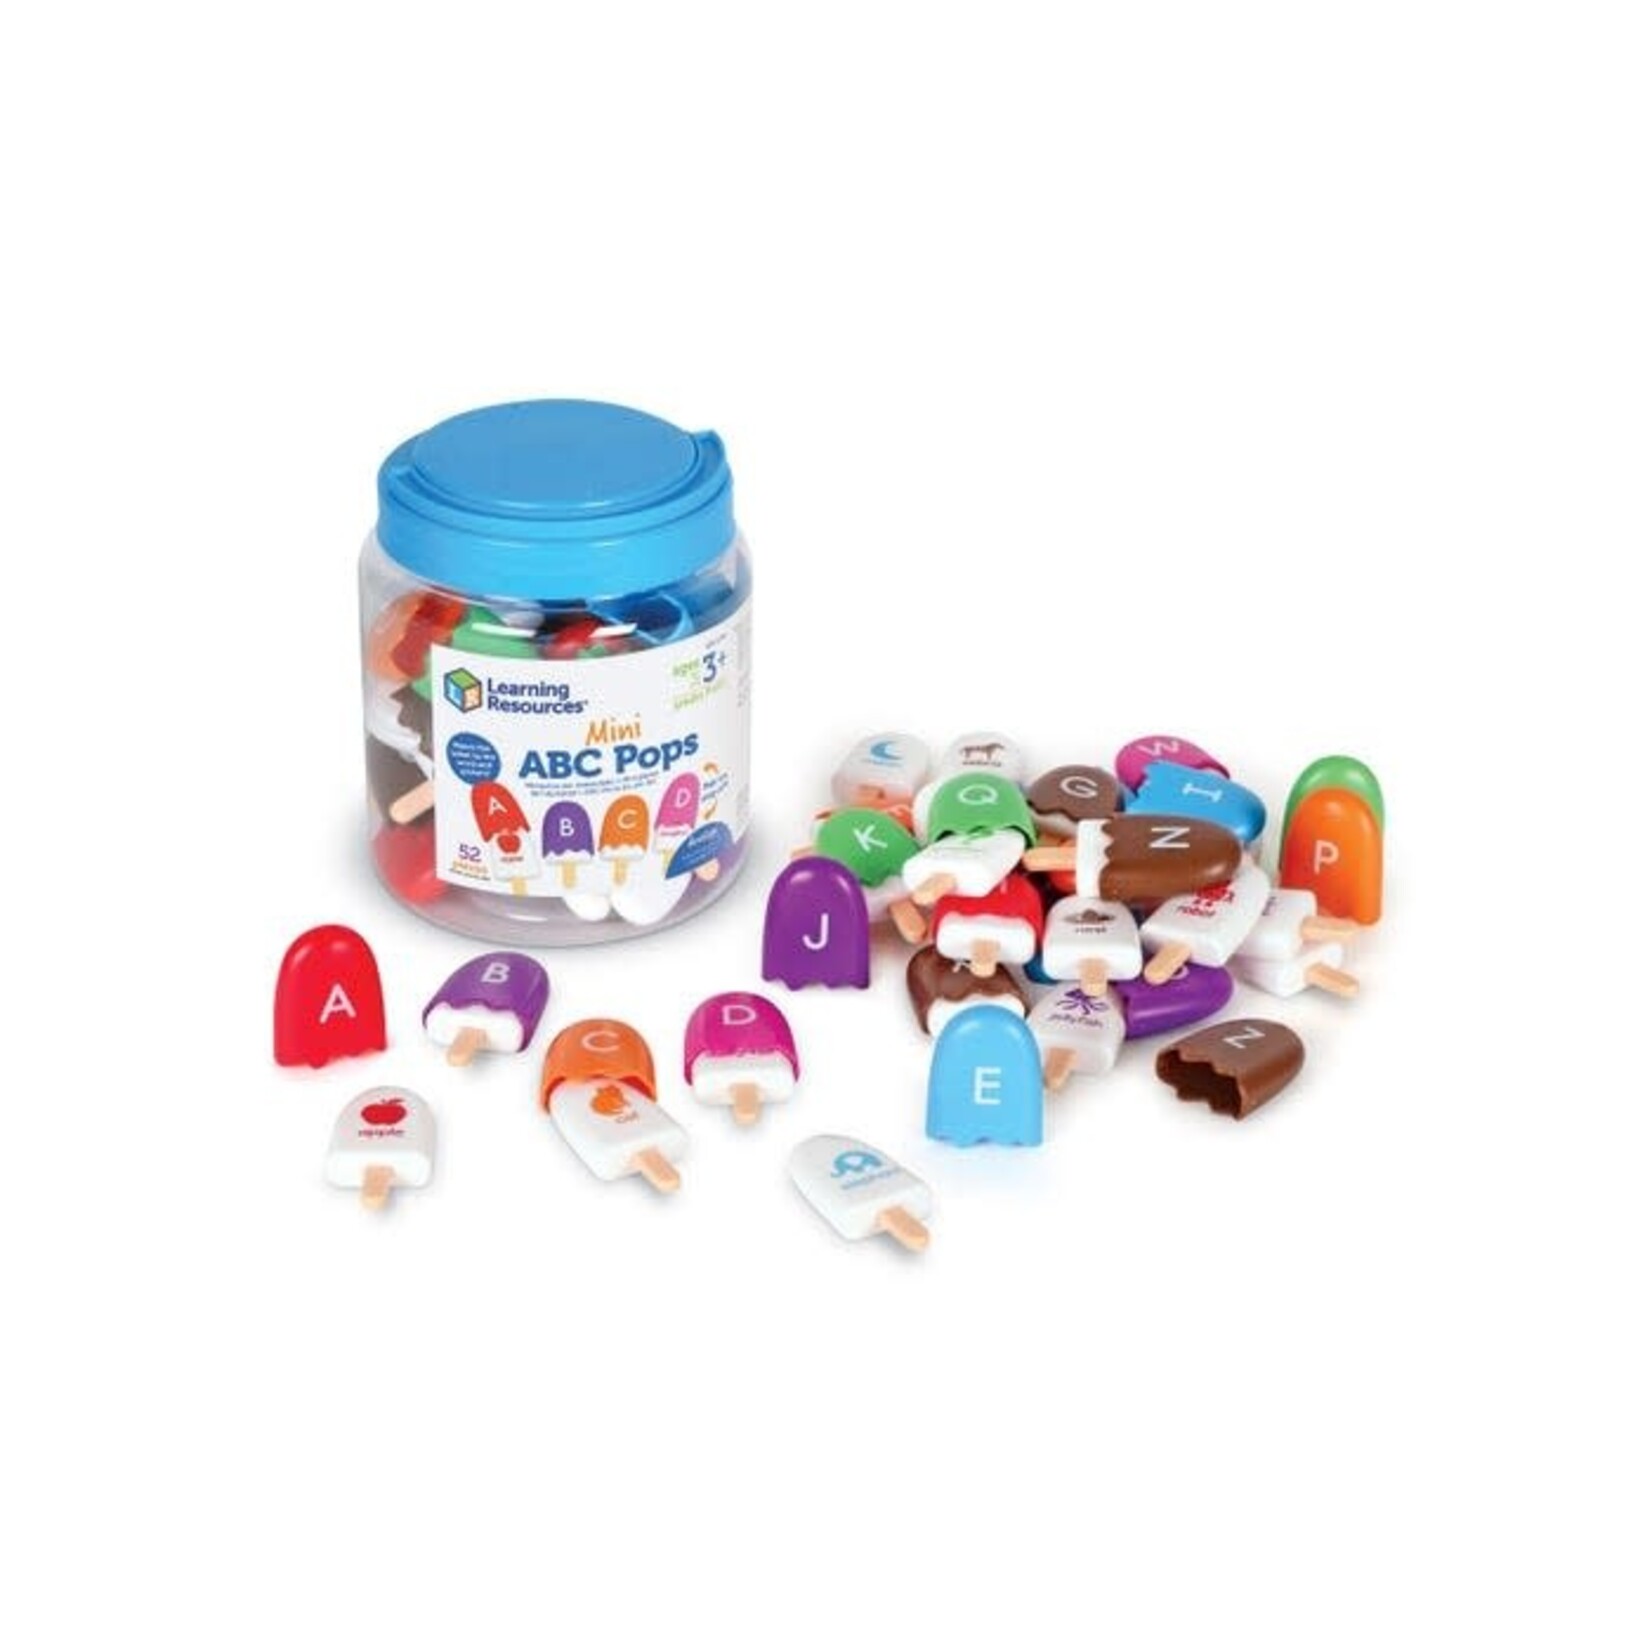 LEARNING RESOURCES INC Mini ABC Pops